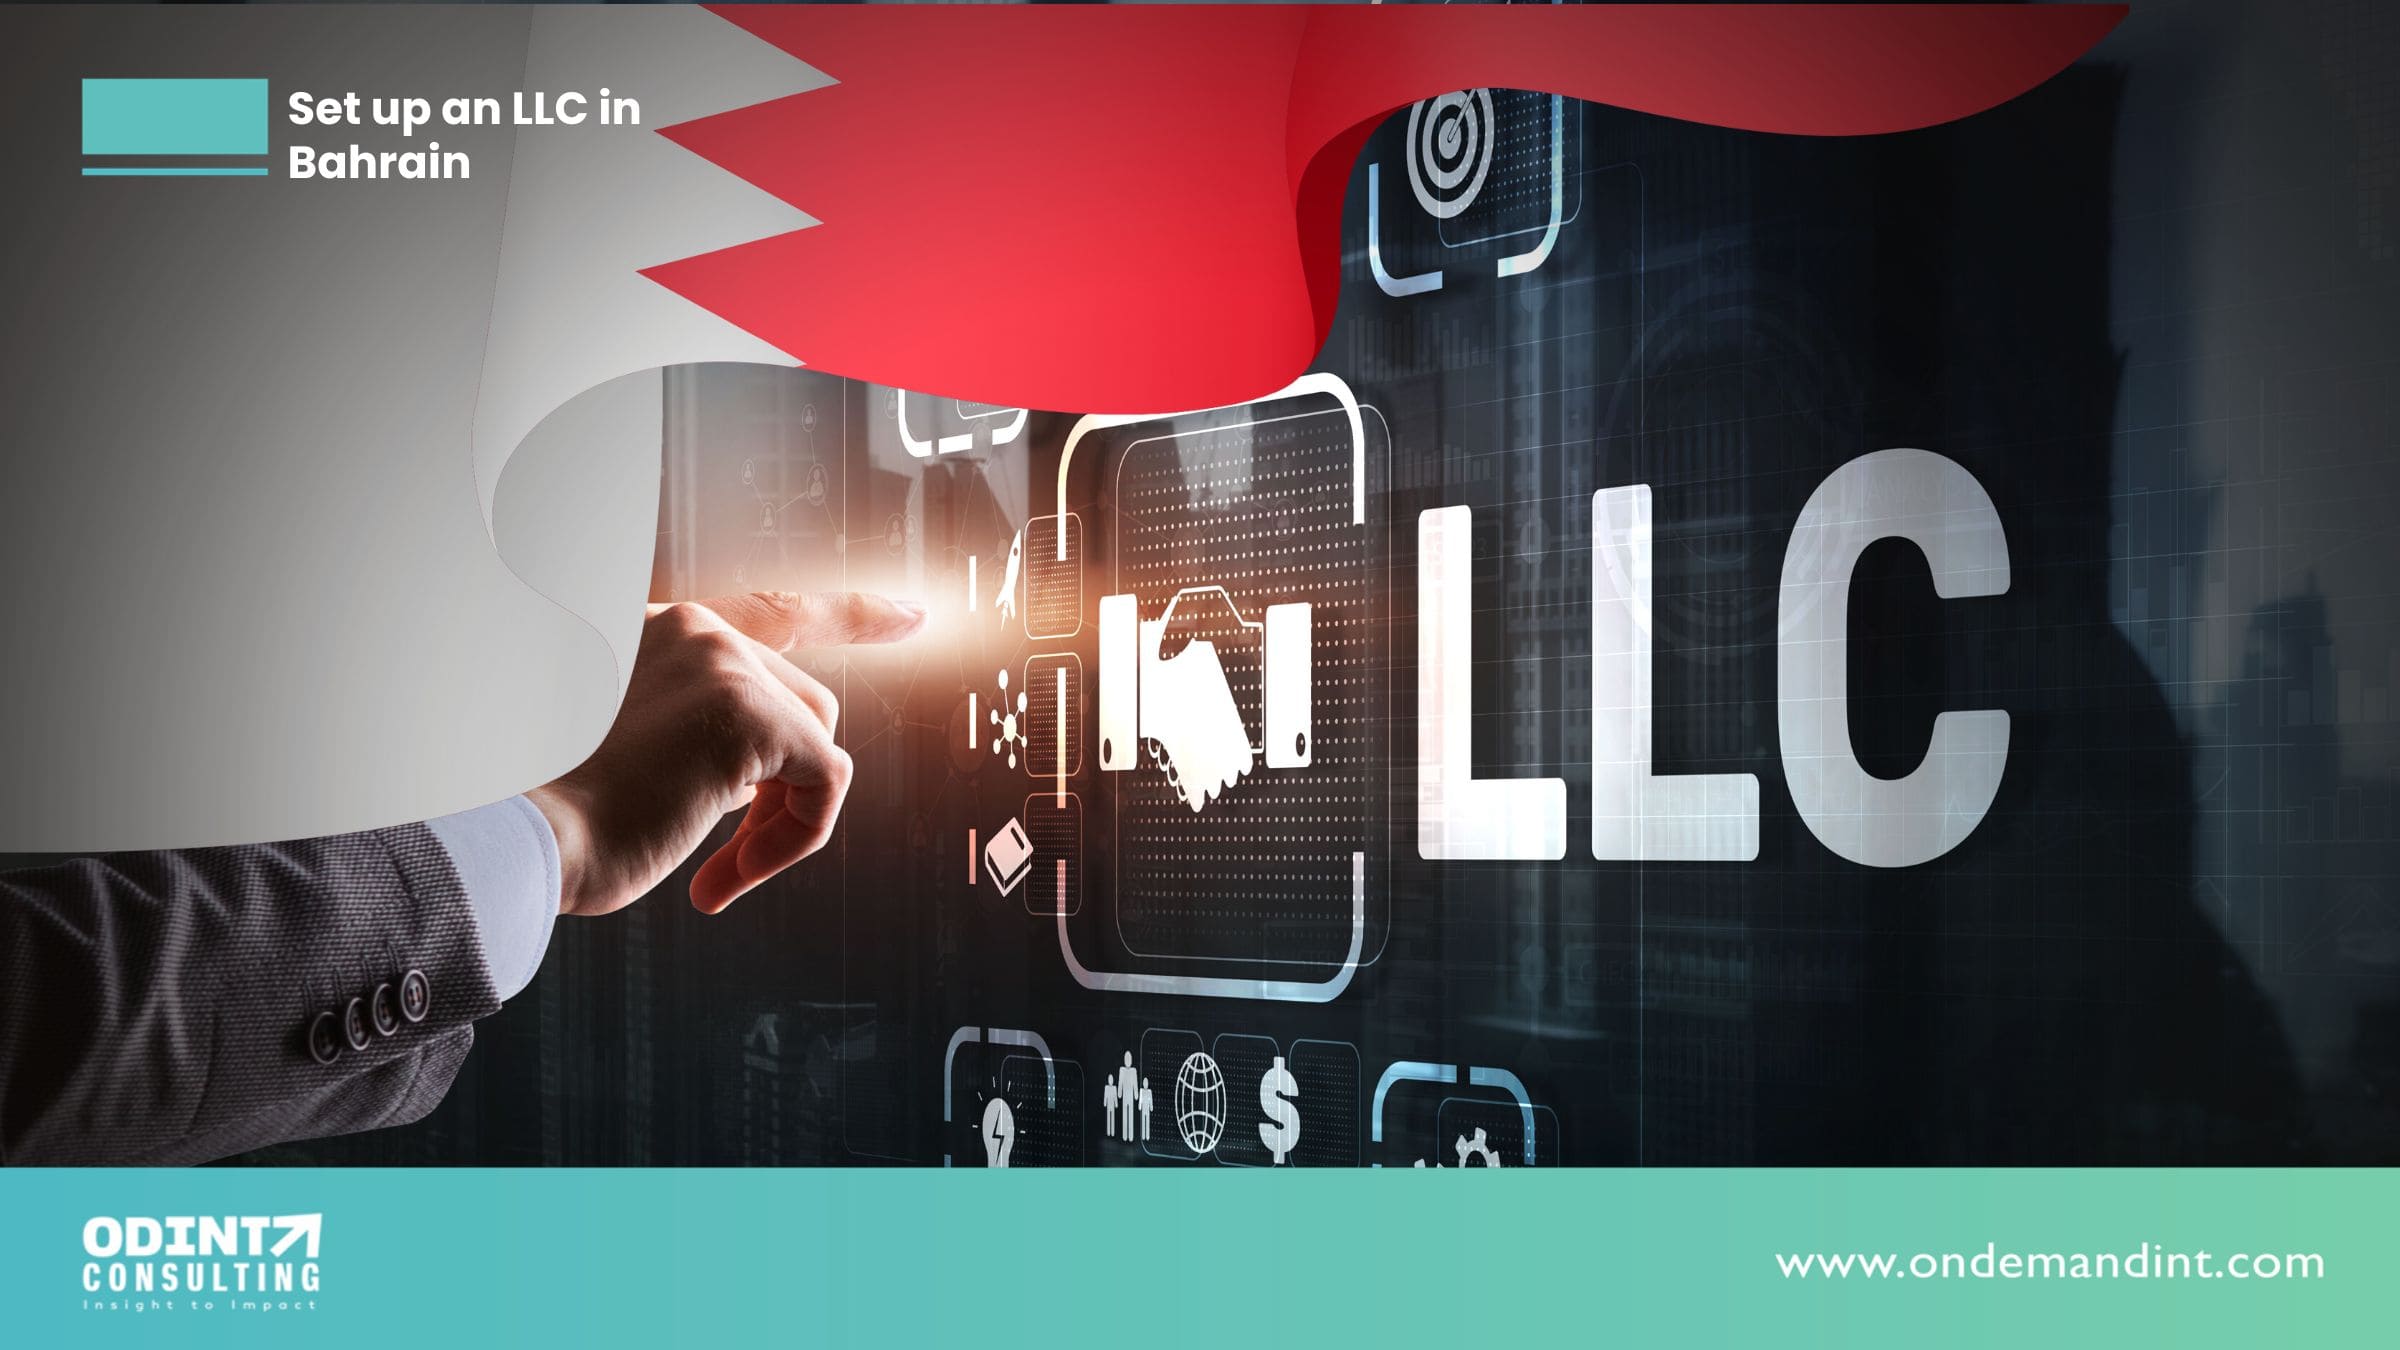 Set up an LLC in Bahrain: Steps, Reasons, Costs and Eligibility